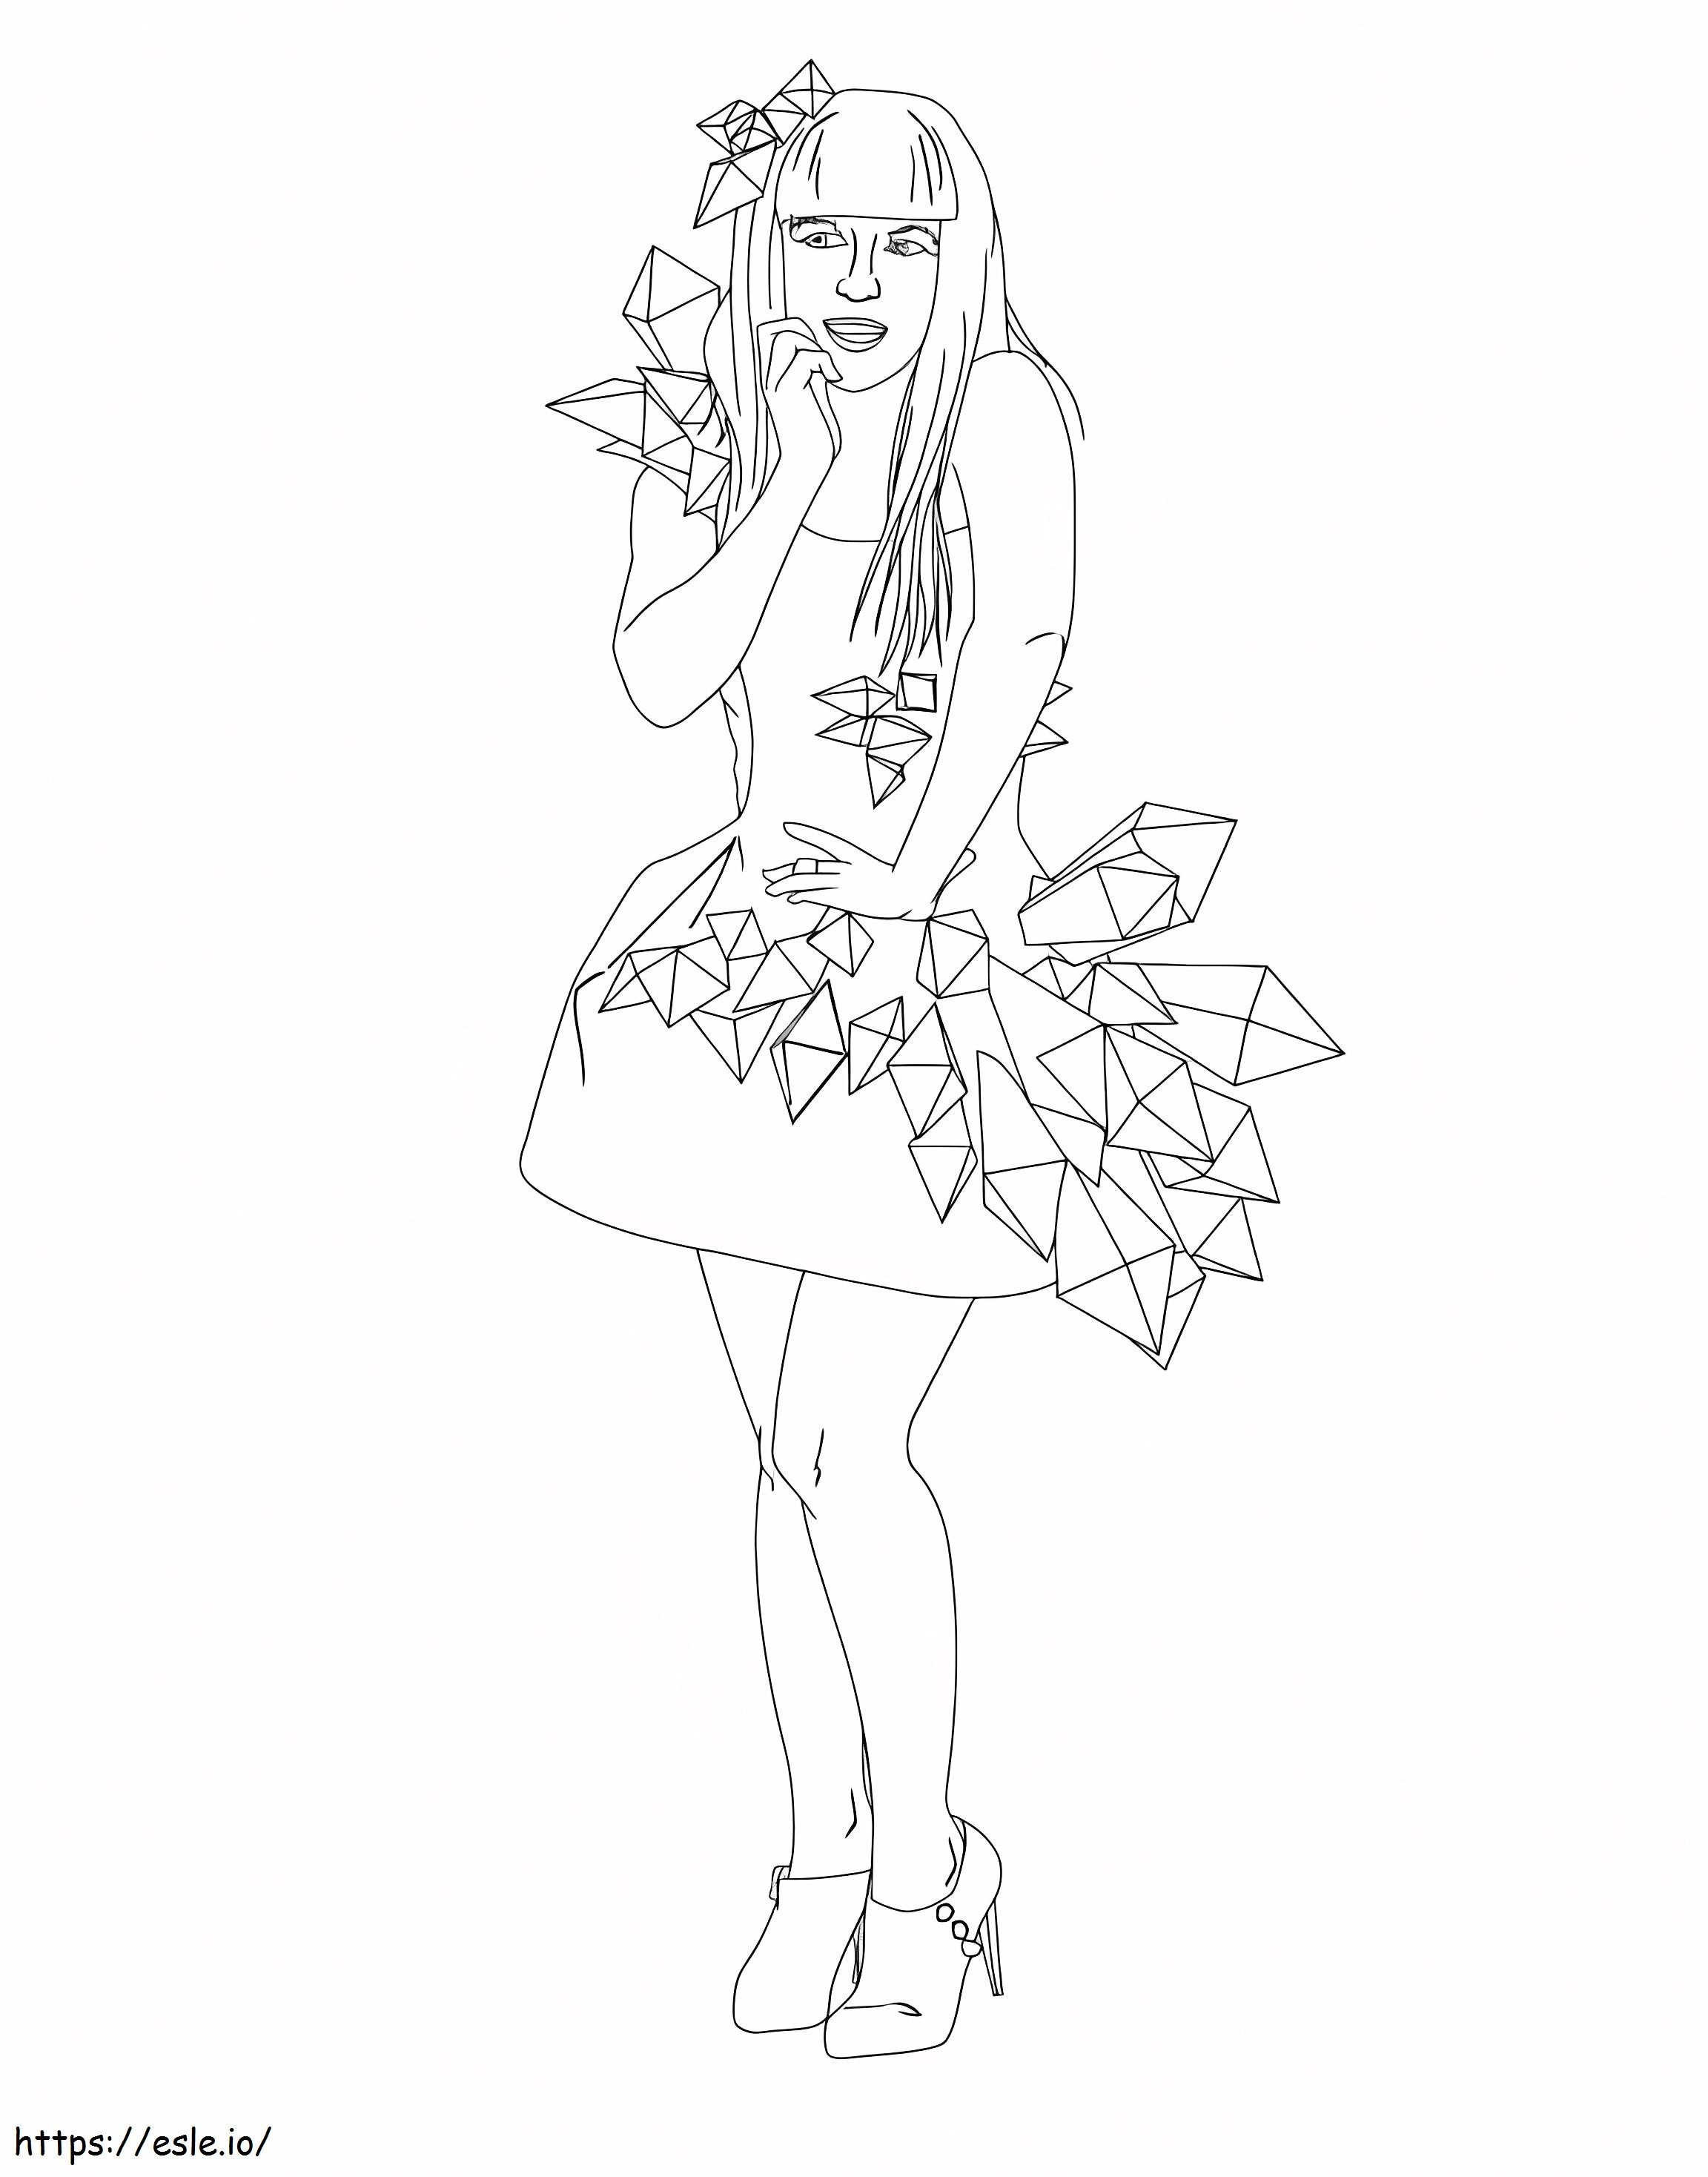 Lovely Lady Gaga coloring page